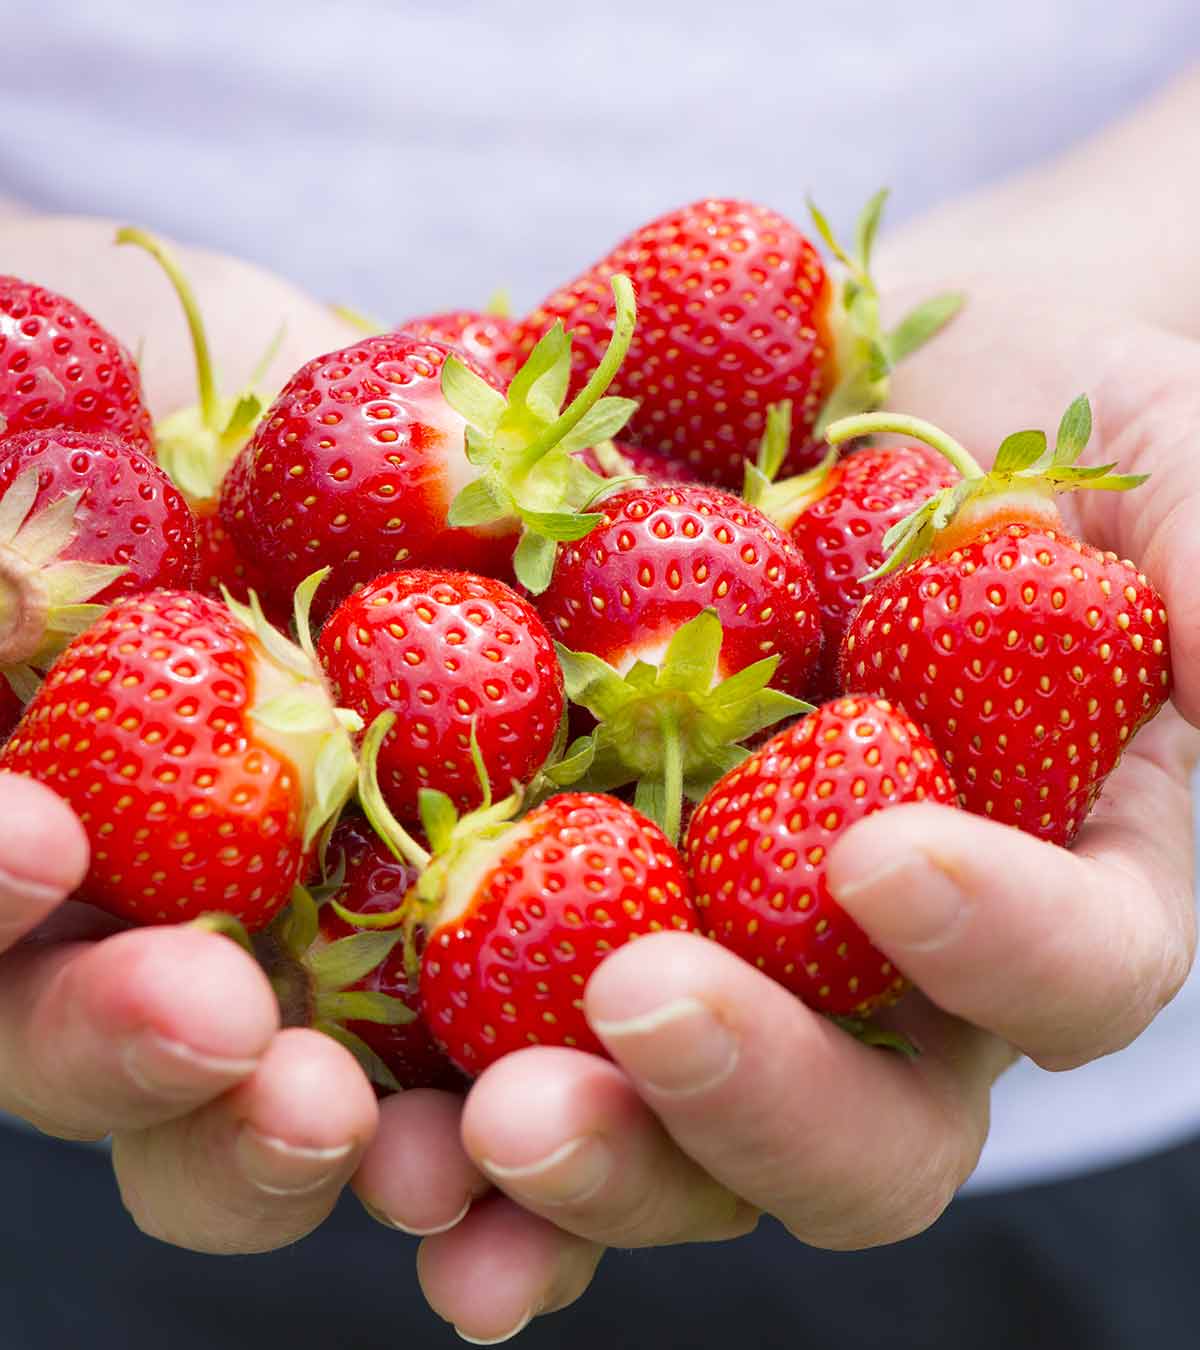 Is It Safe To Eat Strawberry During Pregnancy?